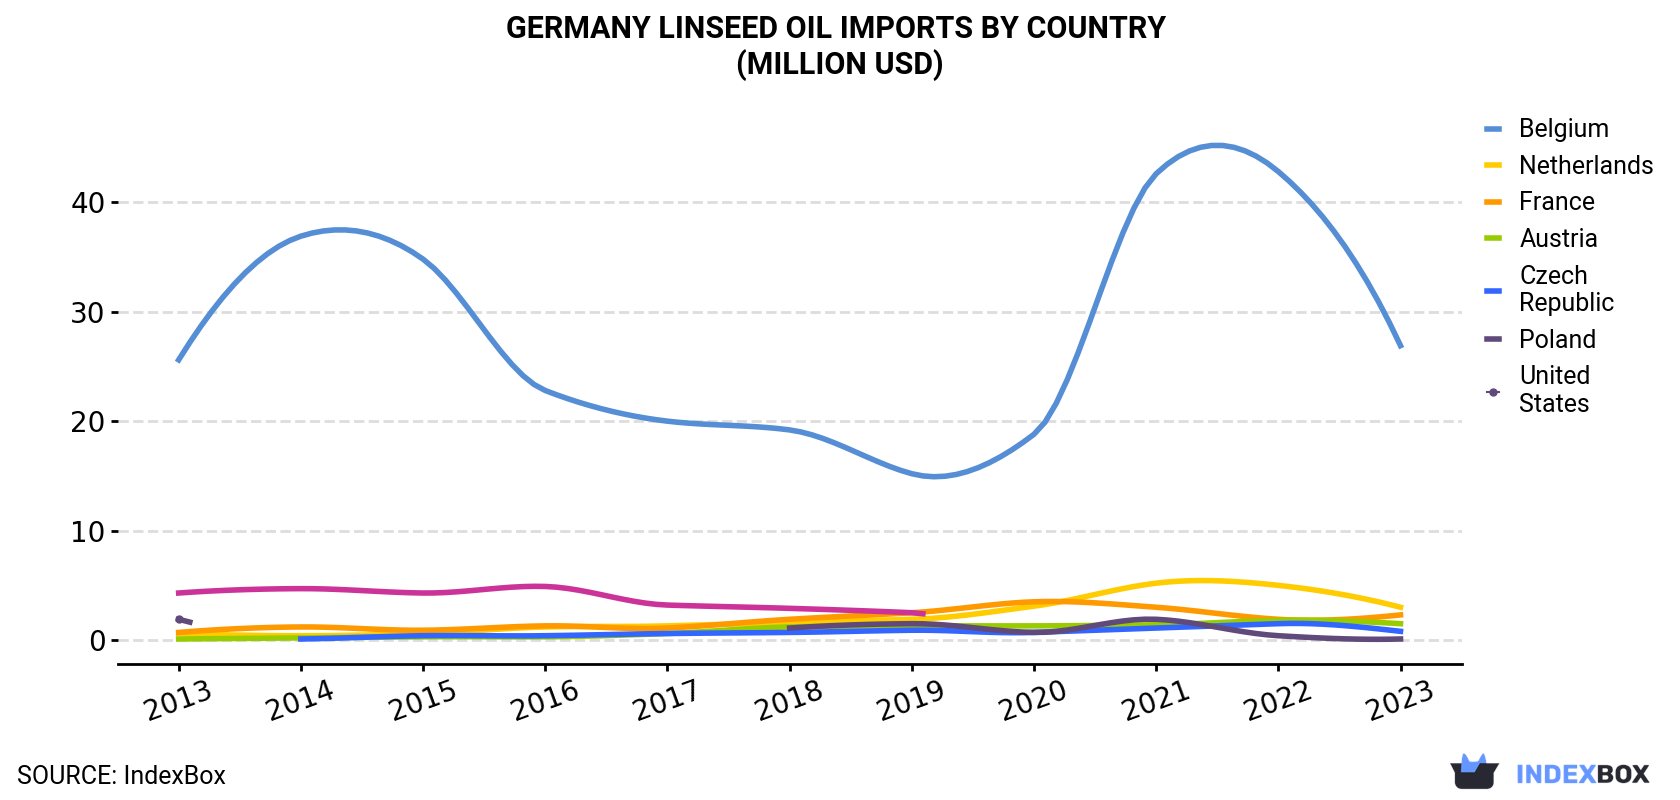 Germany Linseed Oil Imports By Country (Million USD)